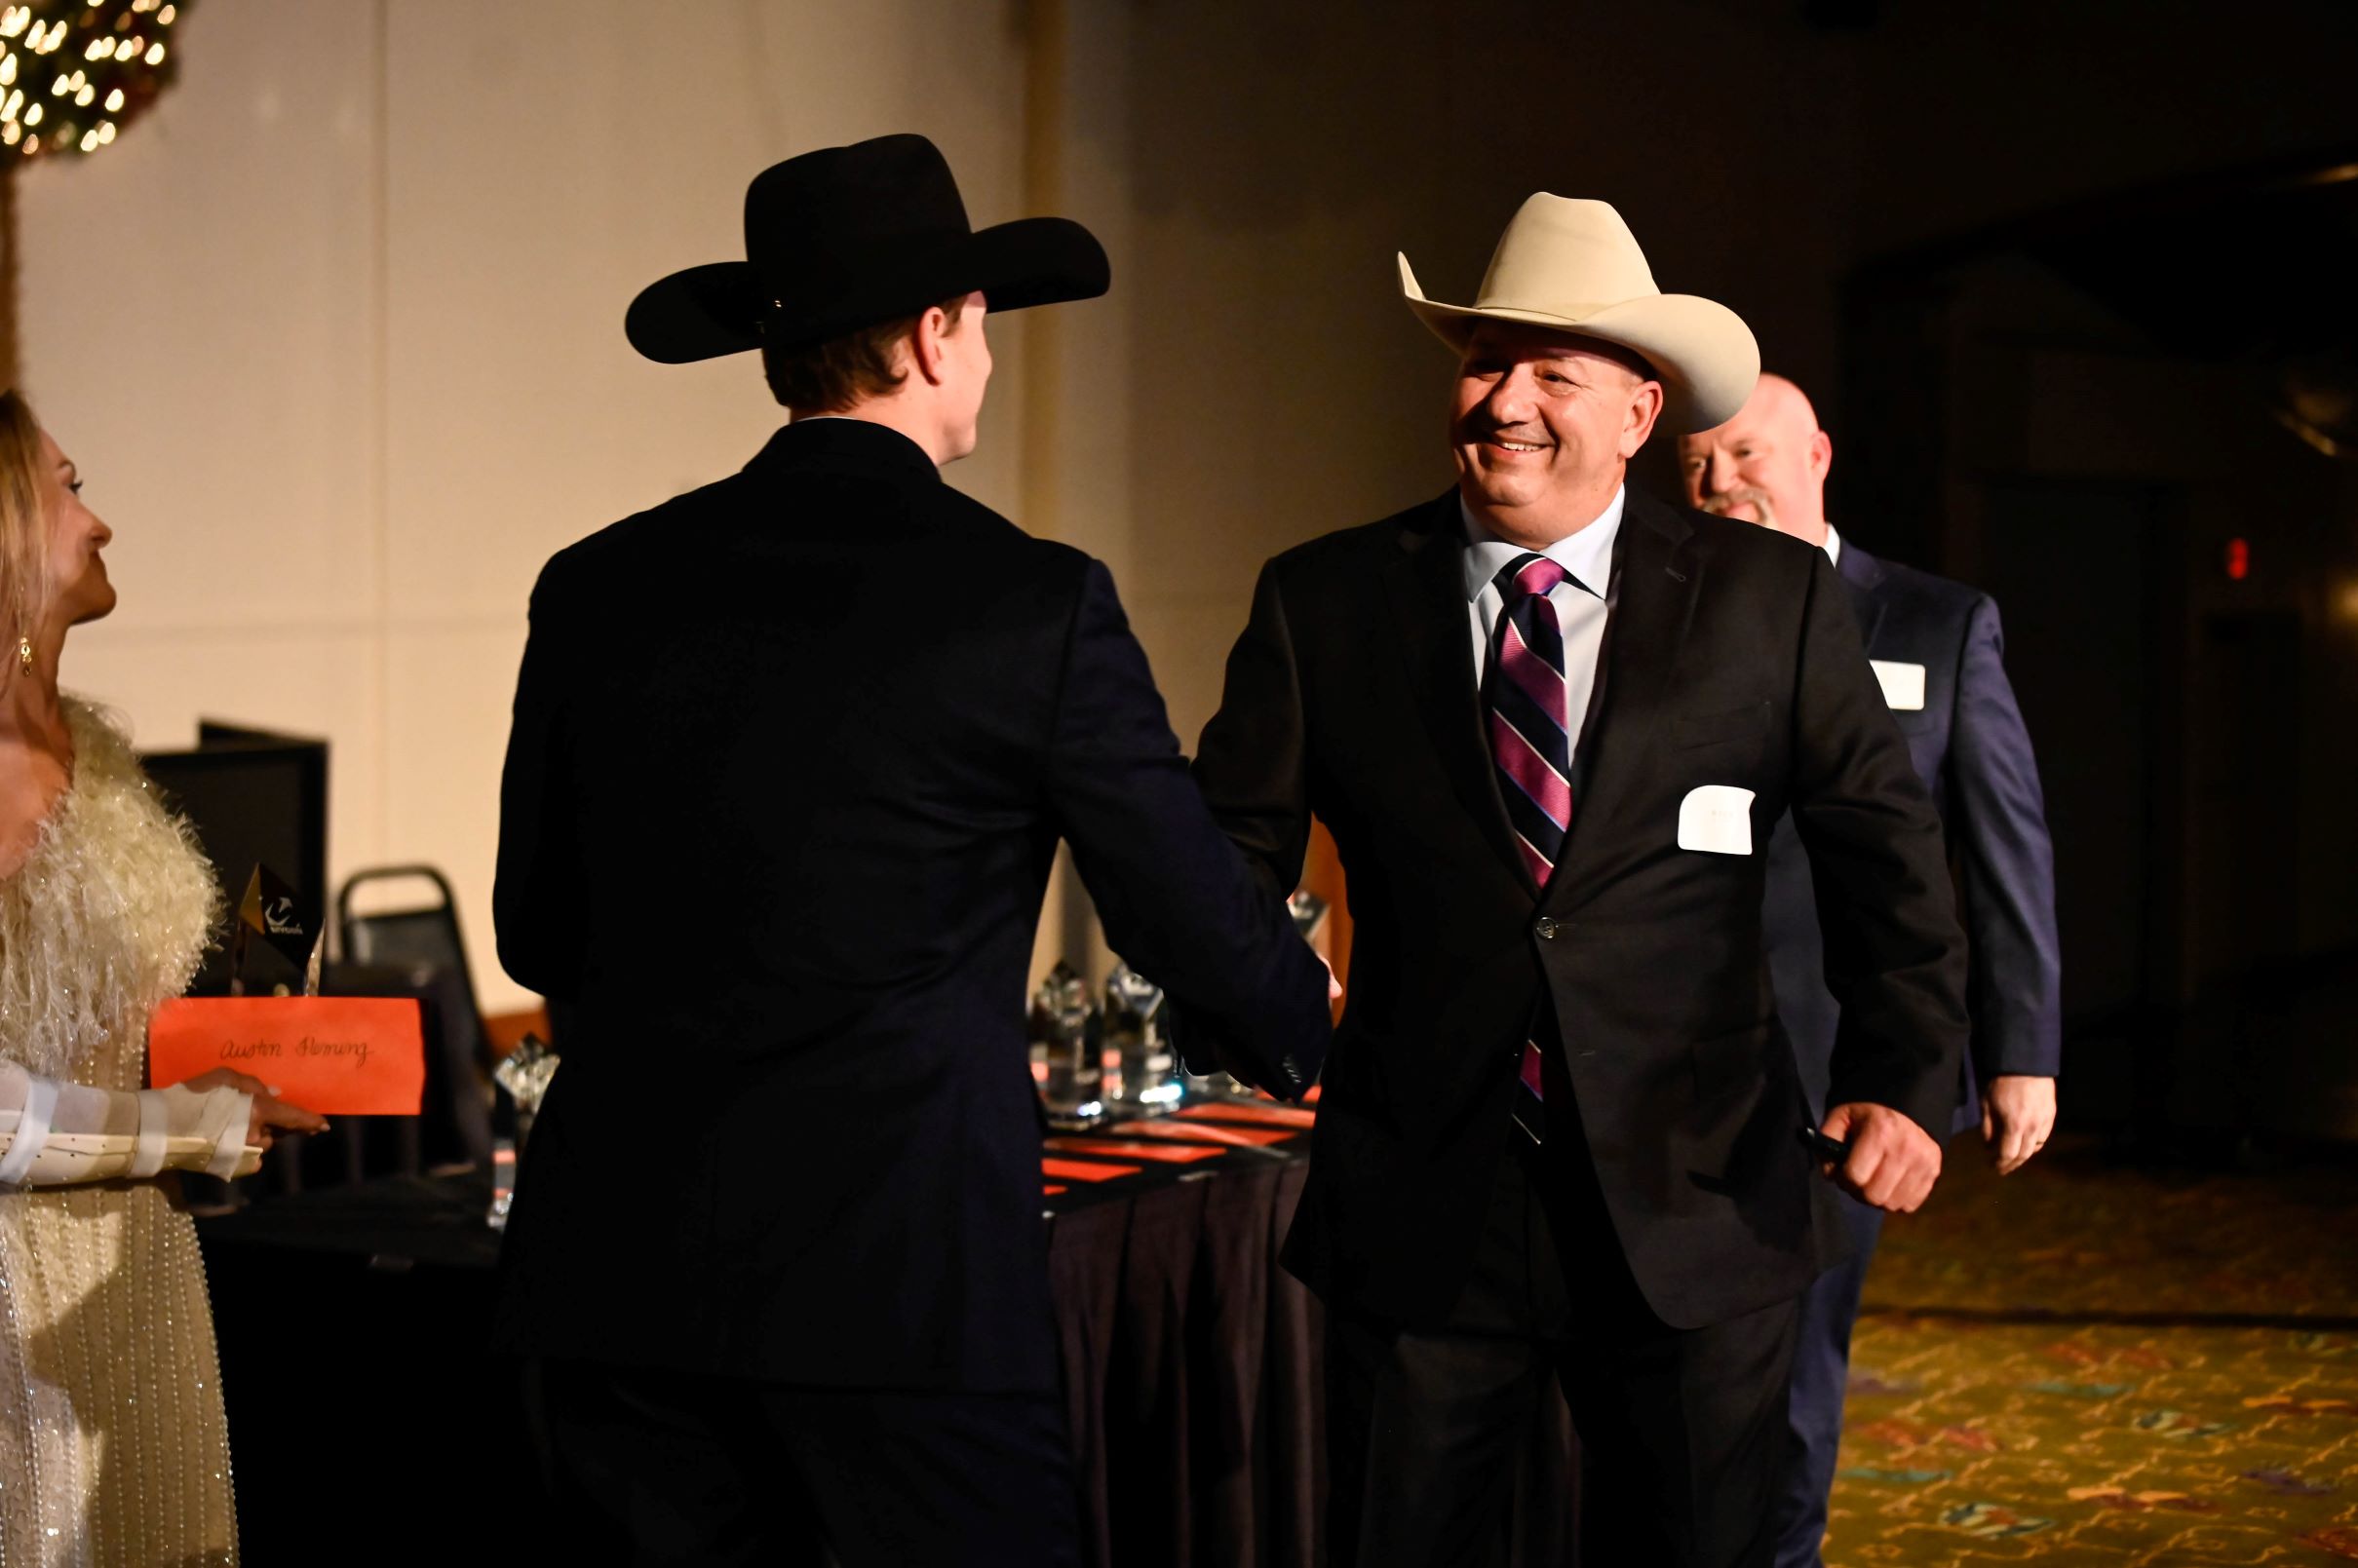 Two men in cowboy hats shaking hands at an indoor event.